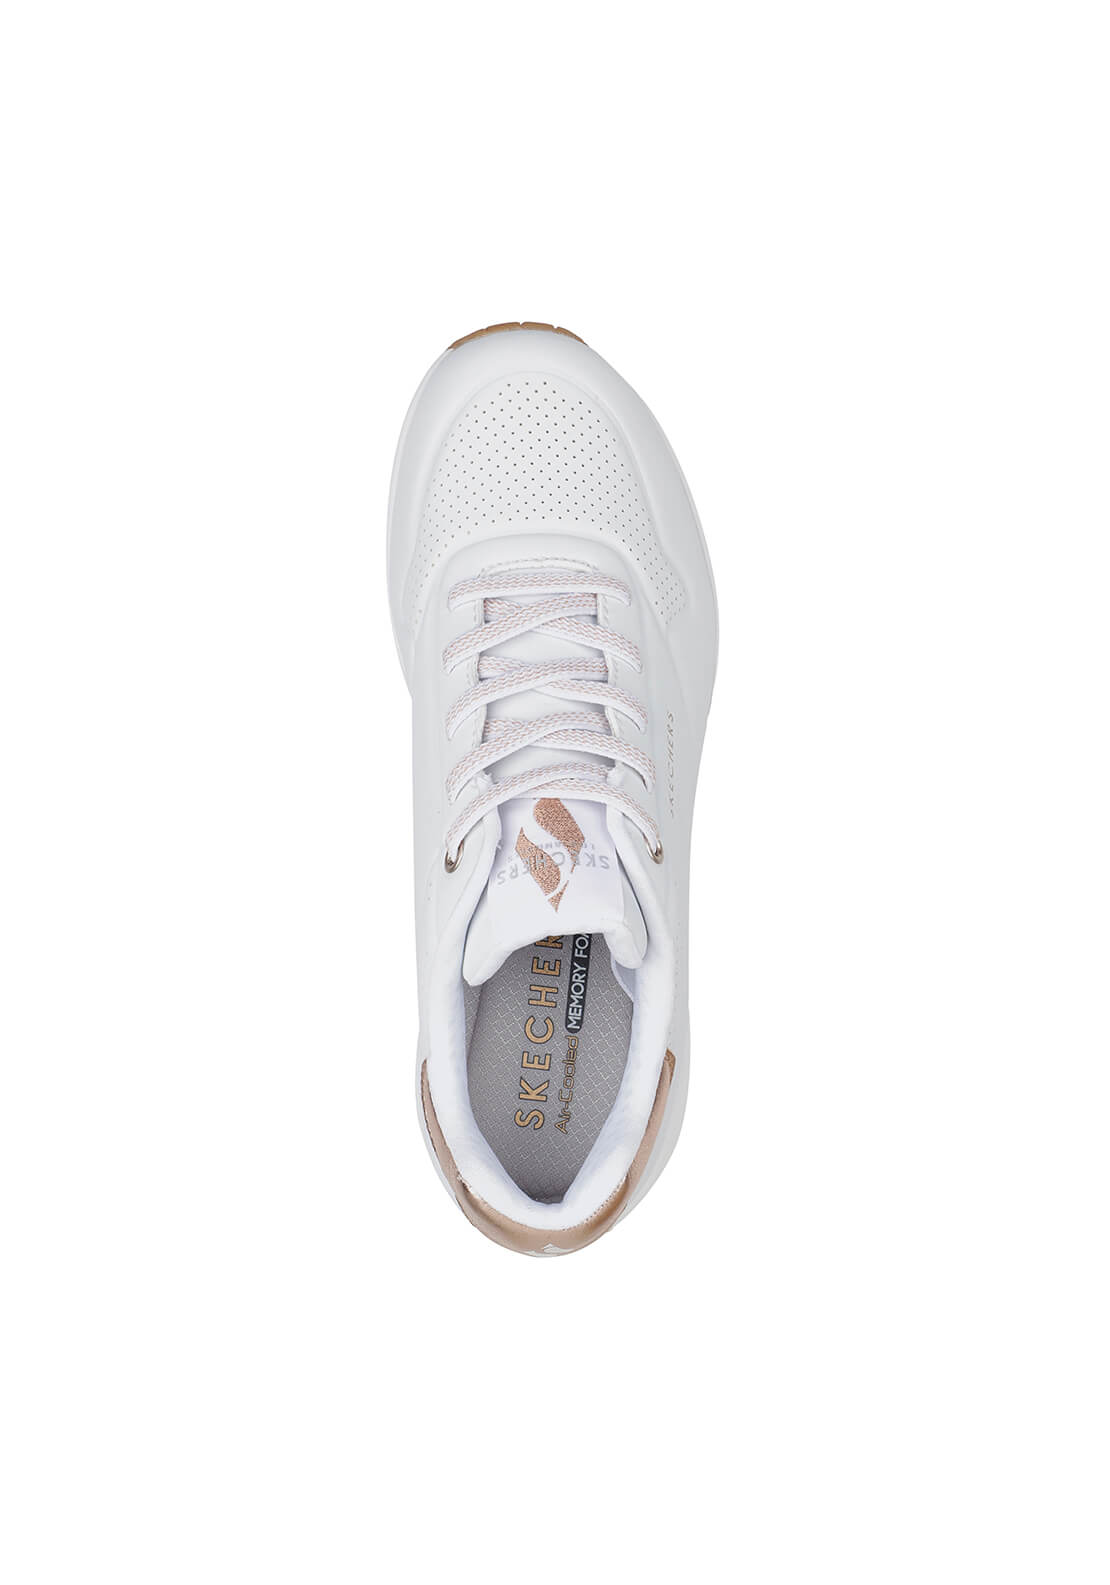 Skechers Street Uno Shimmer Away - White 4 Shaws Department Stores